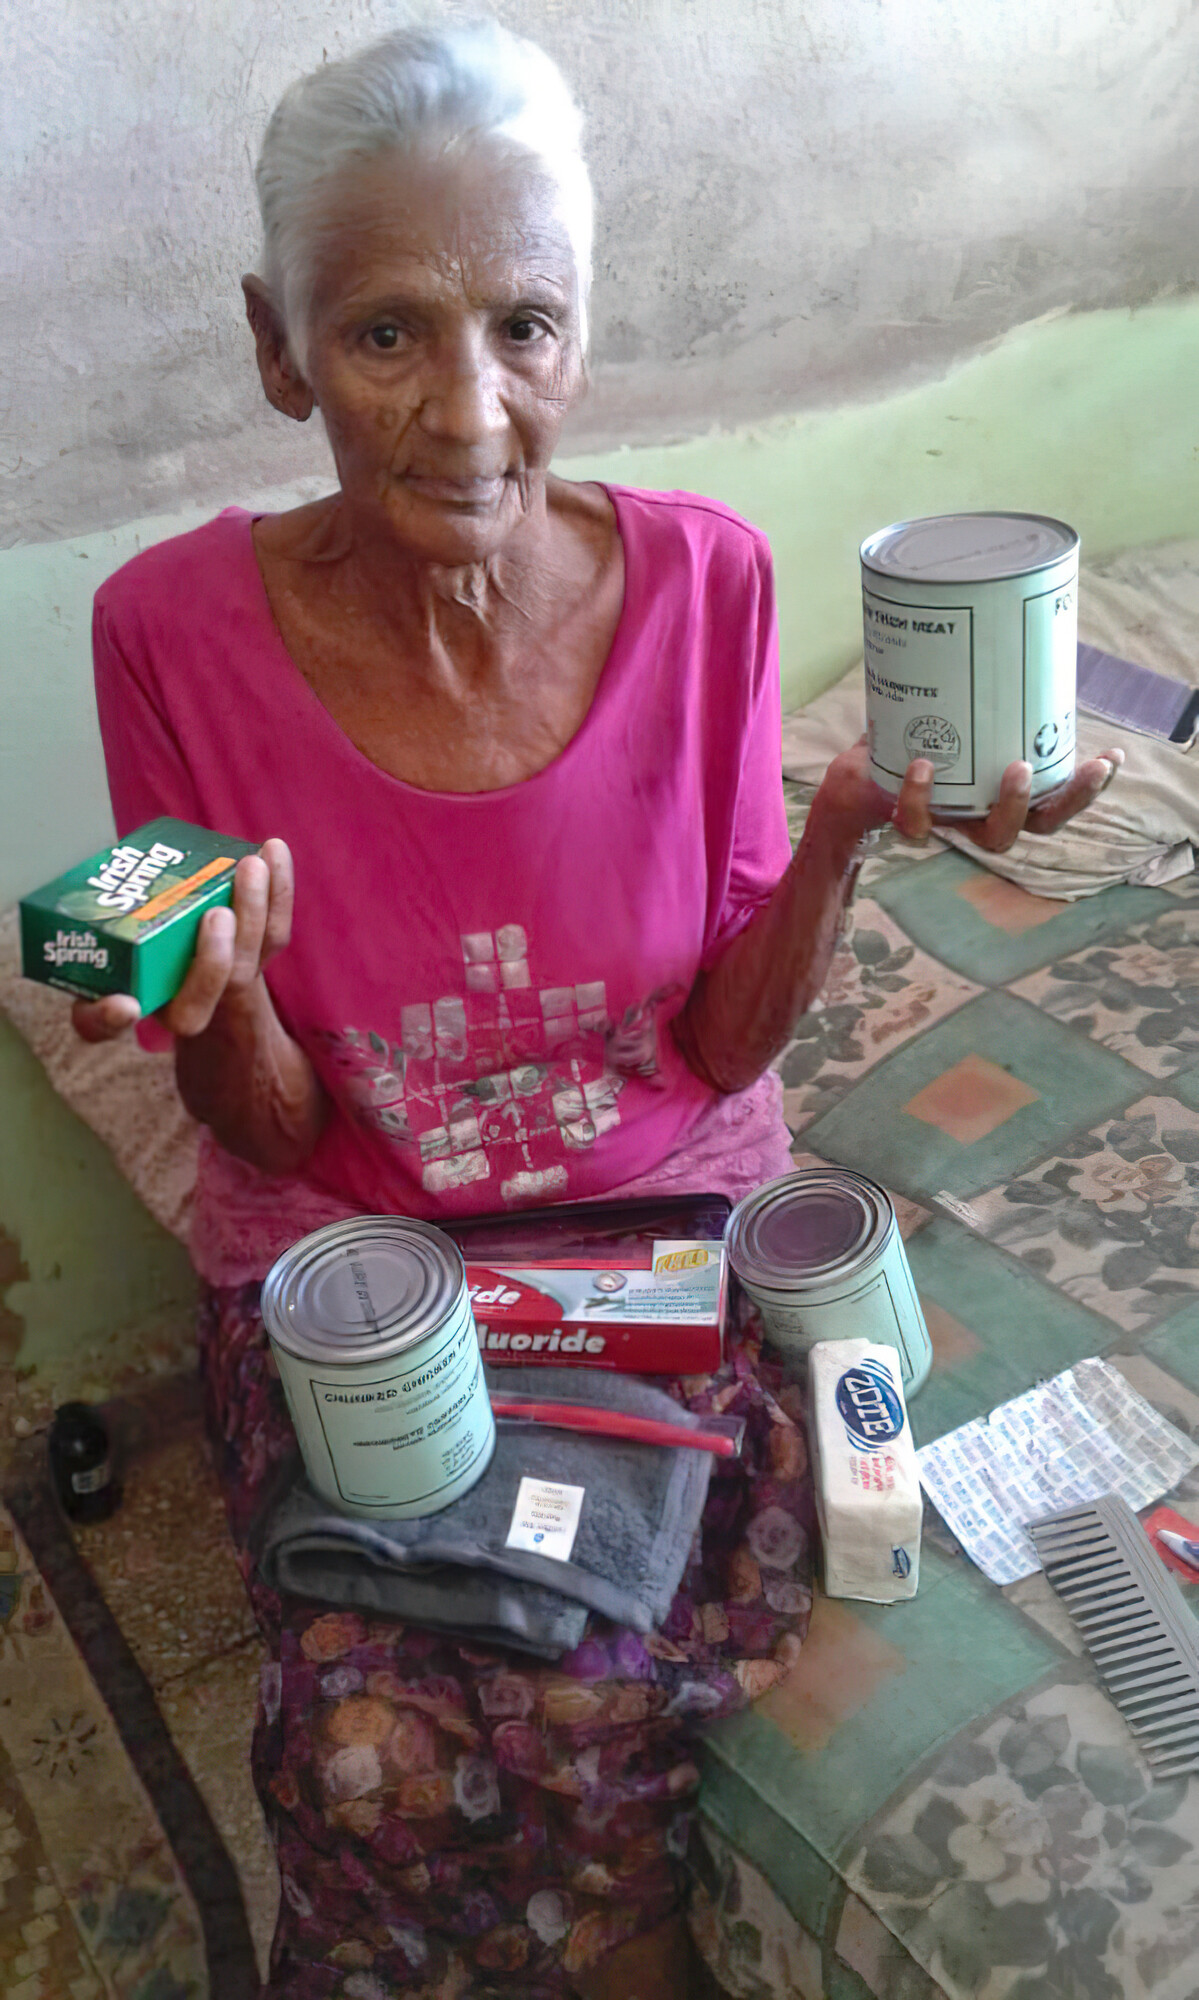 An older Cuban woman sits on a bed. She is holding relief supplies. There are also relief supplies resting on her lap.